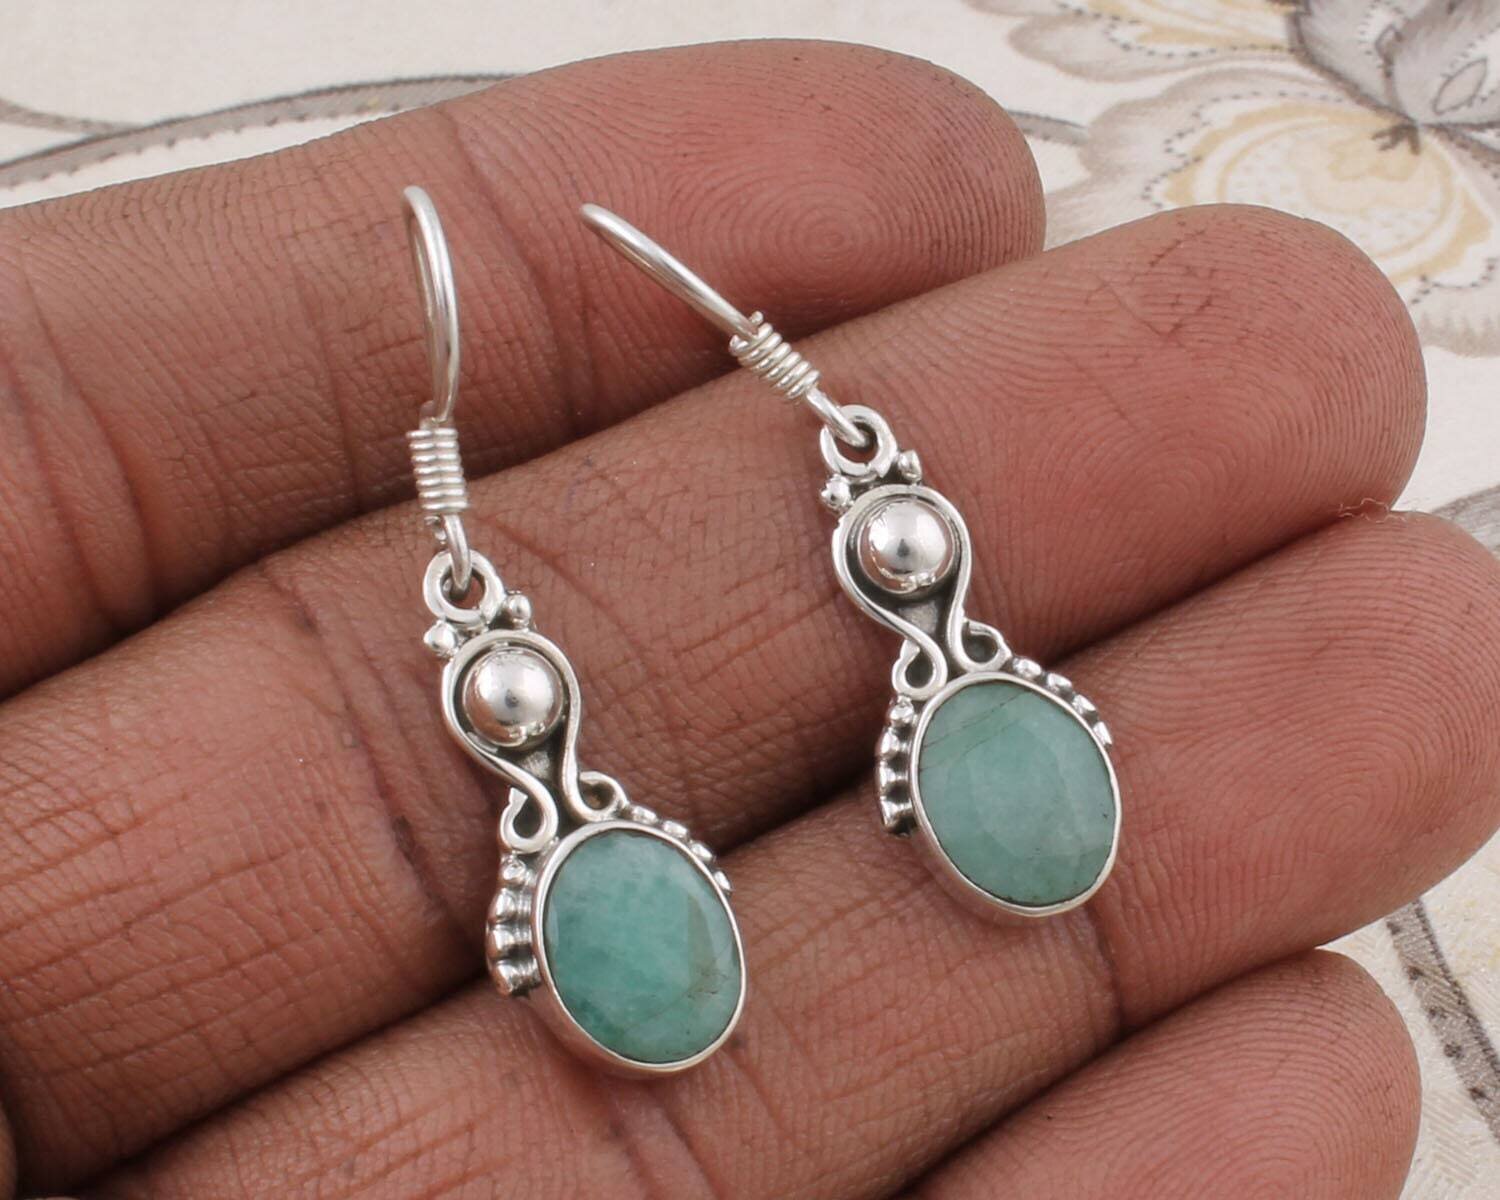 Natural Emerald Top Quality Gemstone Handmade Earring Cut Stone Boho Earring 925-Antique Silver Earring Etsy Cyber Valentine's Day Gift